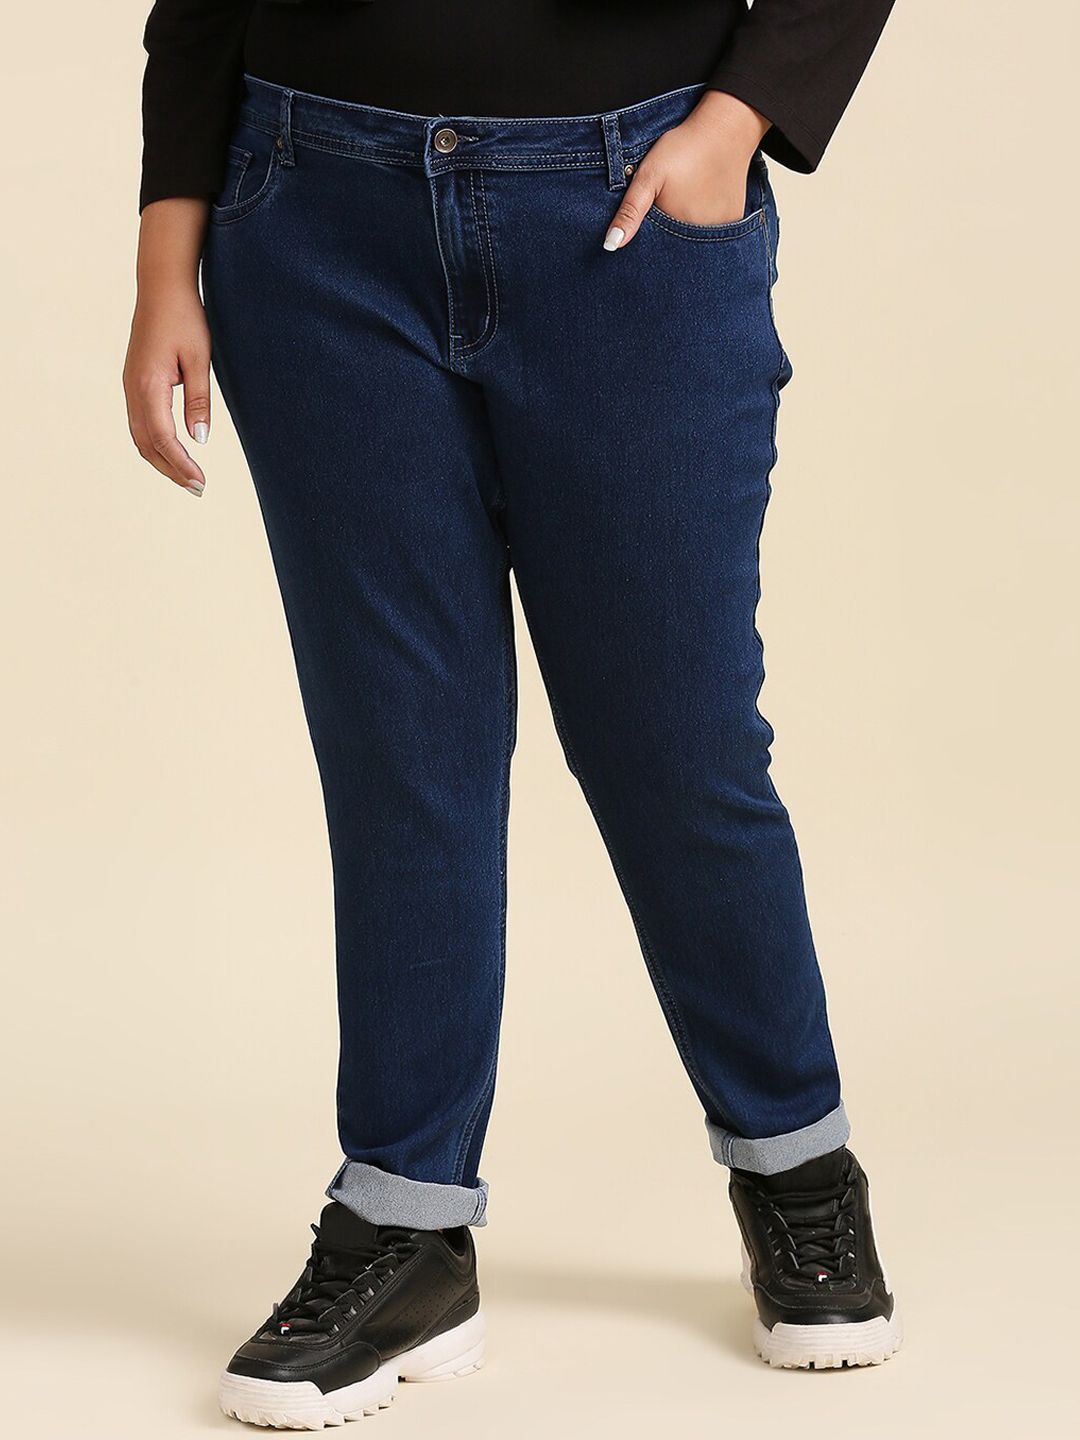 High Star Women Plus Size Blue Slim Fit Stretchable Jeans Price in India